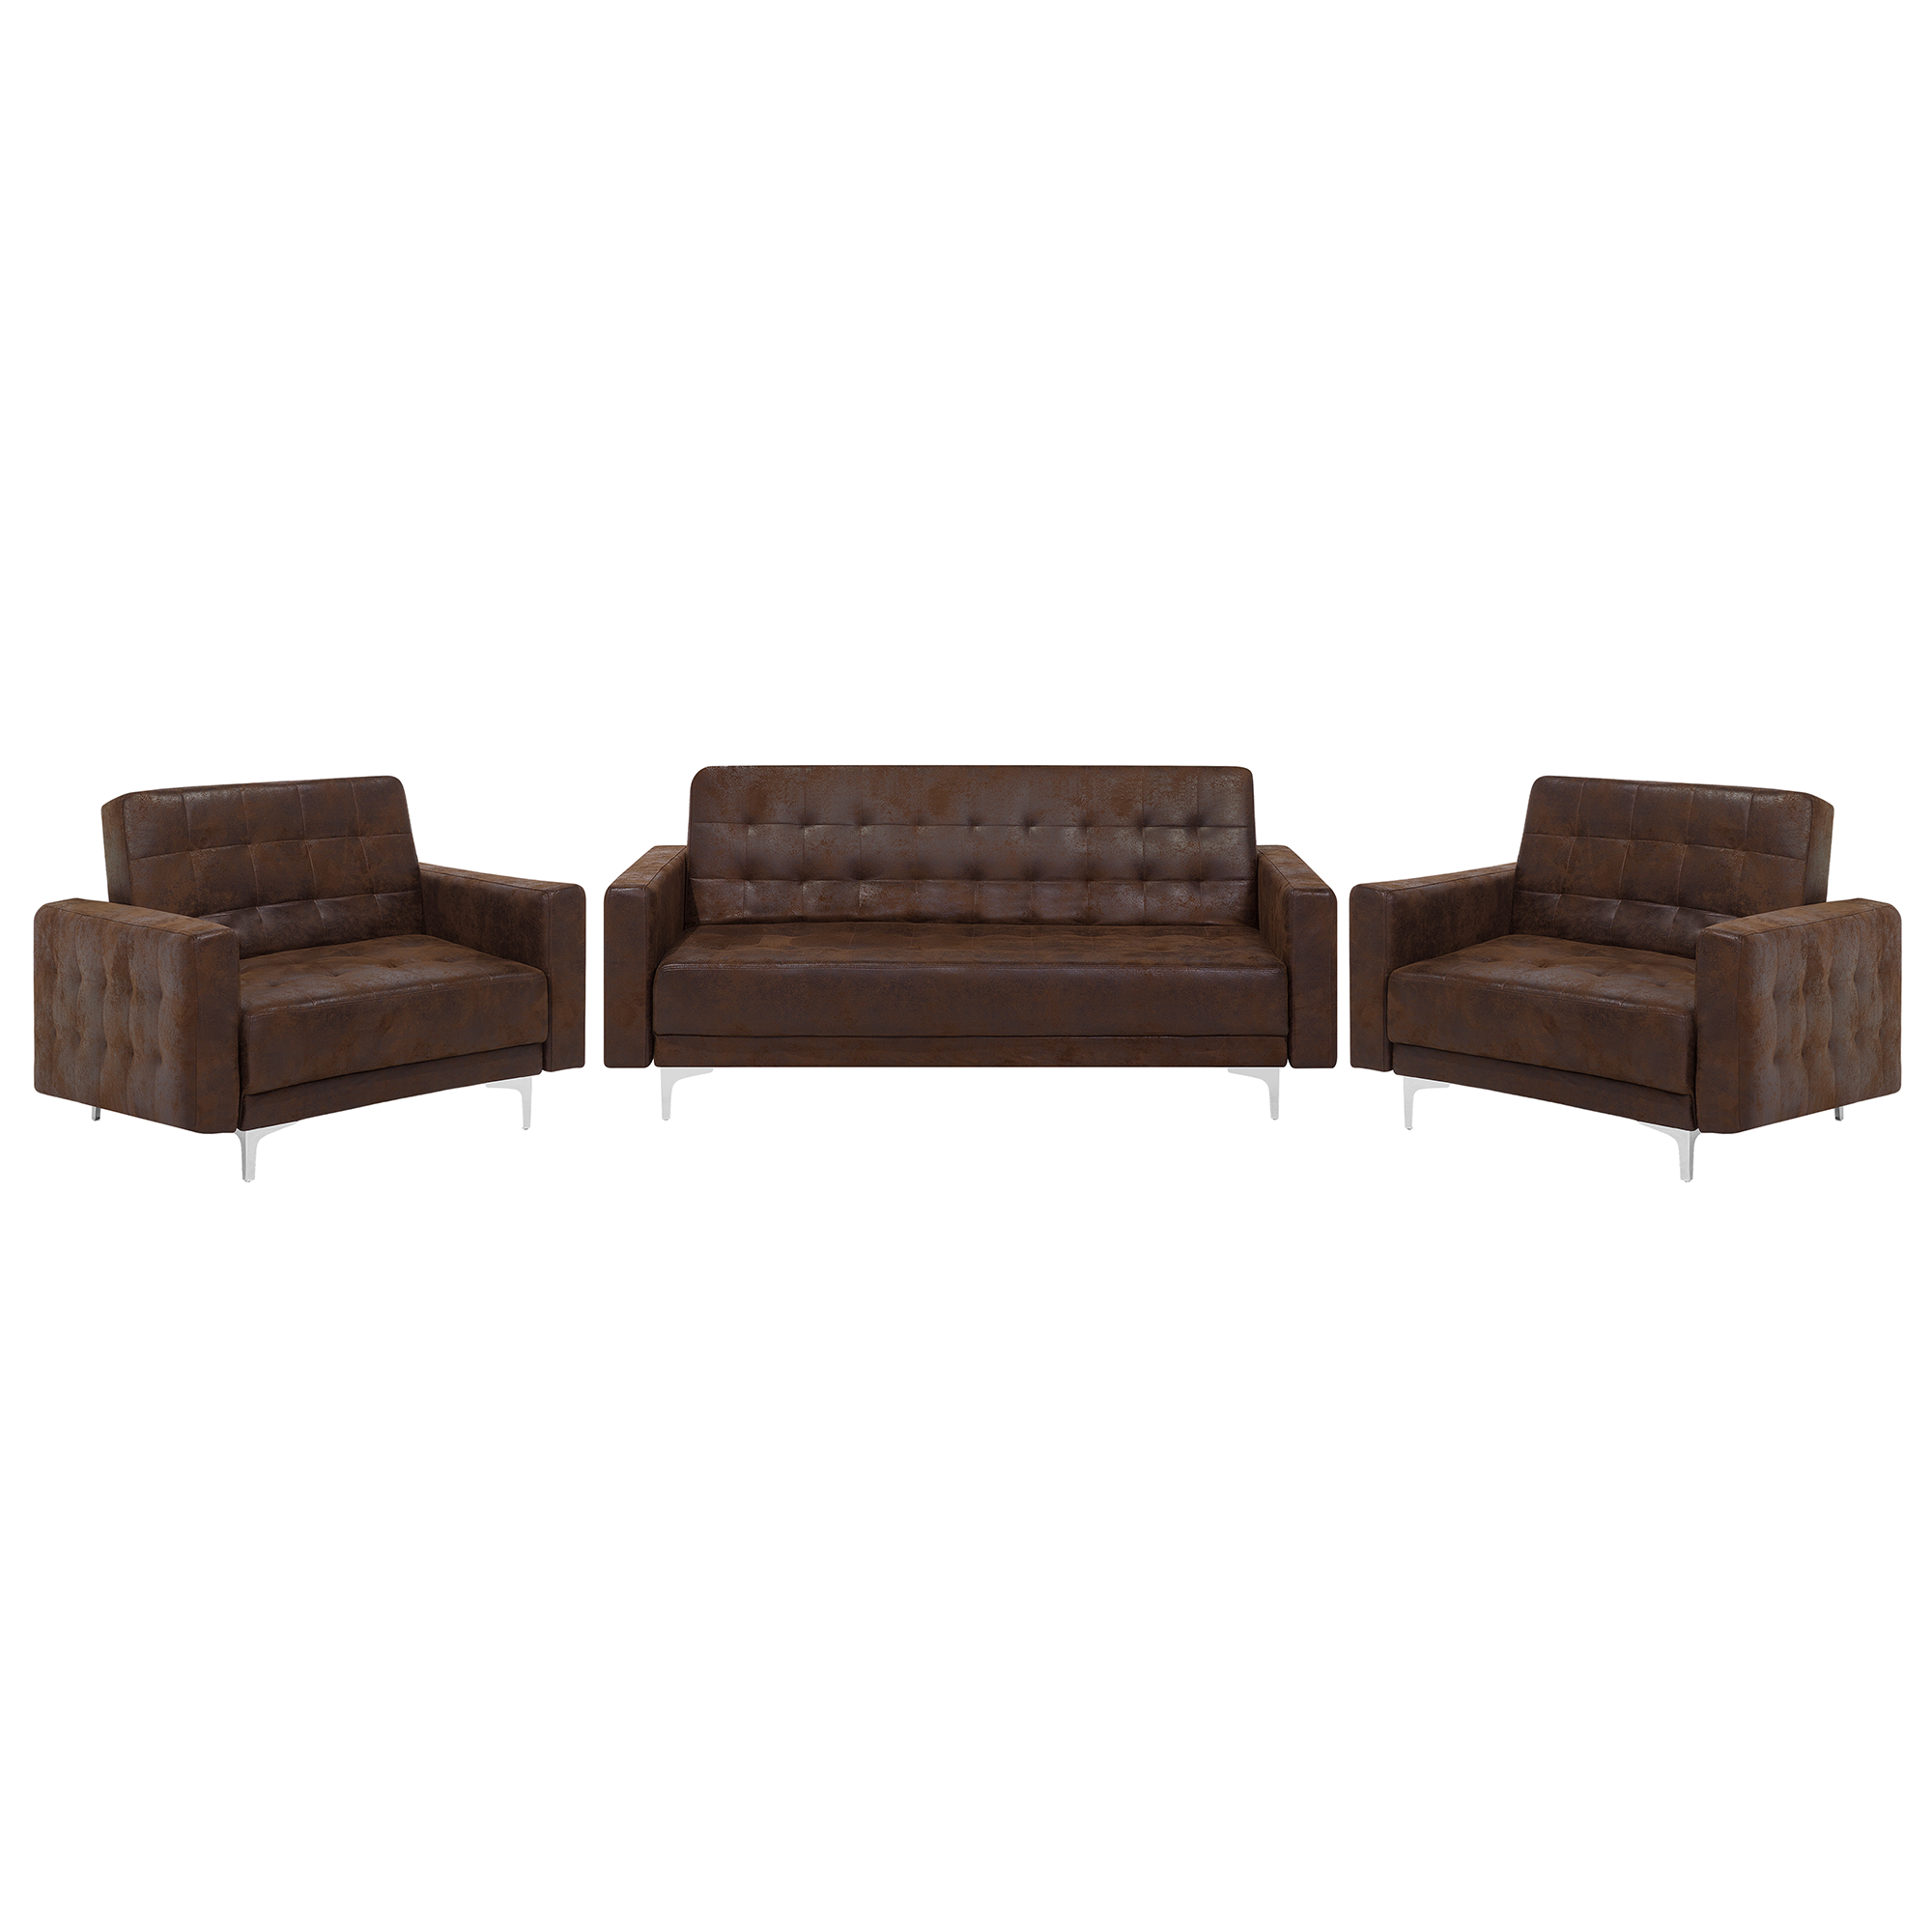 Beliani Living Room Set Brown Faux Leather Tufted 3 Seater Sofa Bed 2 Reclining Armchairs Modern 3-Piece Suite